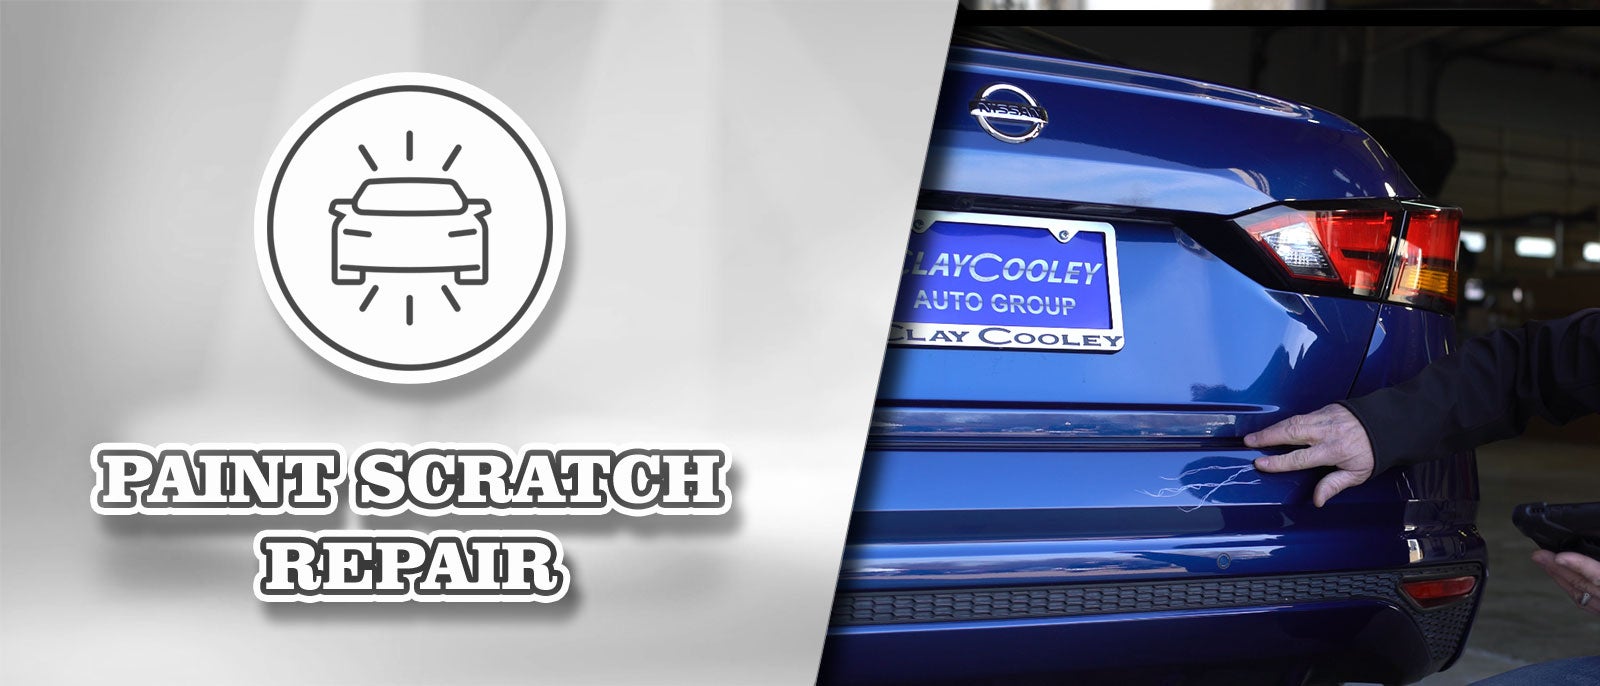 Paint Scratch Repair at Clay Cooley Chevrolet of Irving in Irving TX